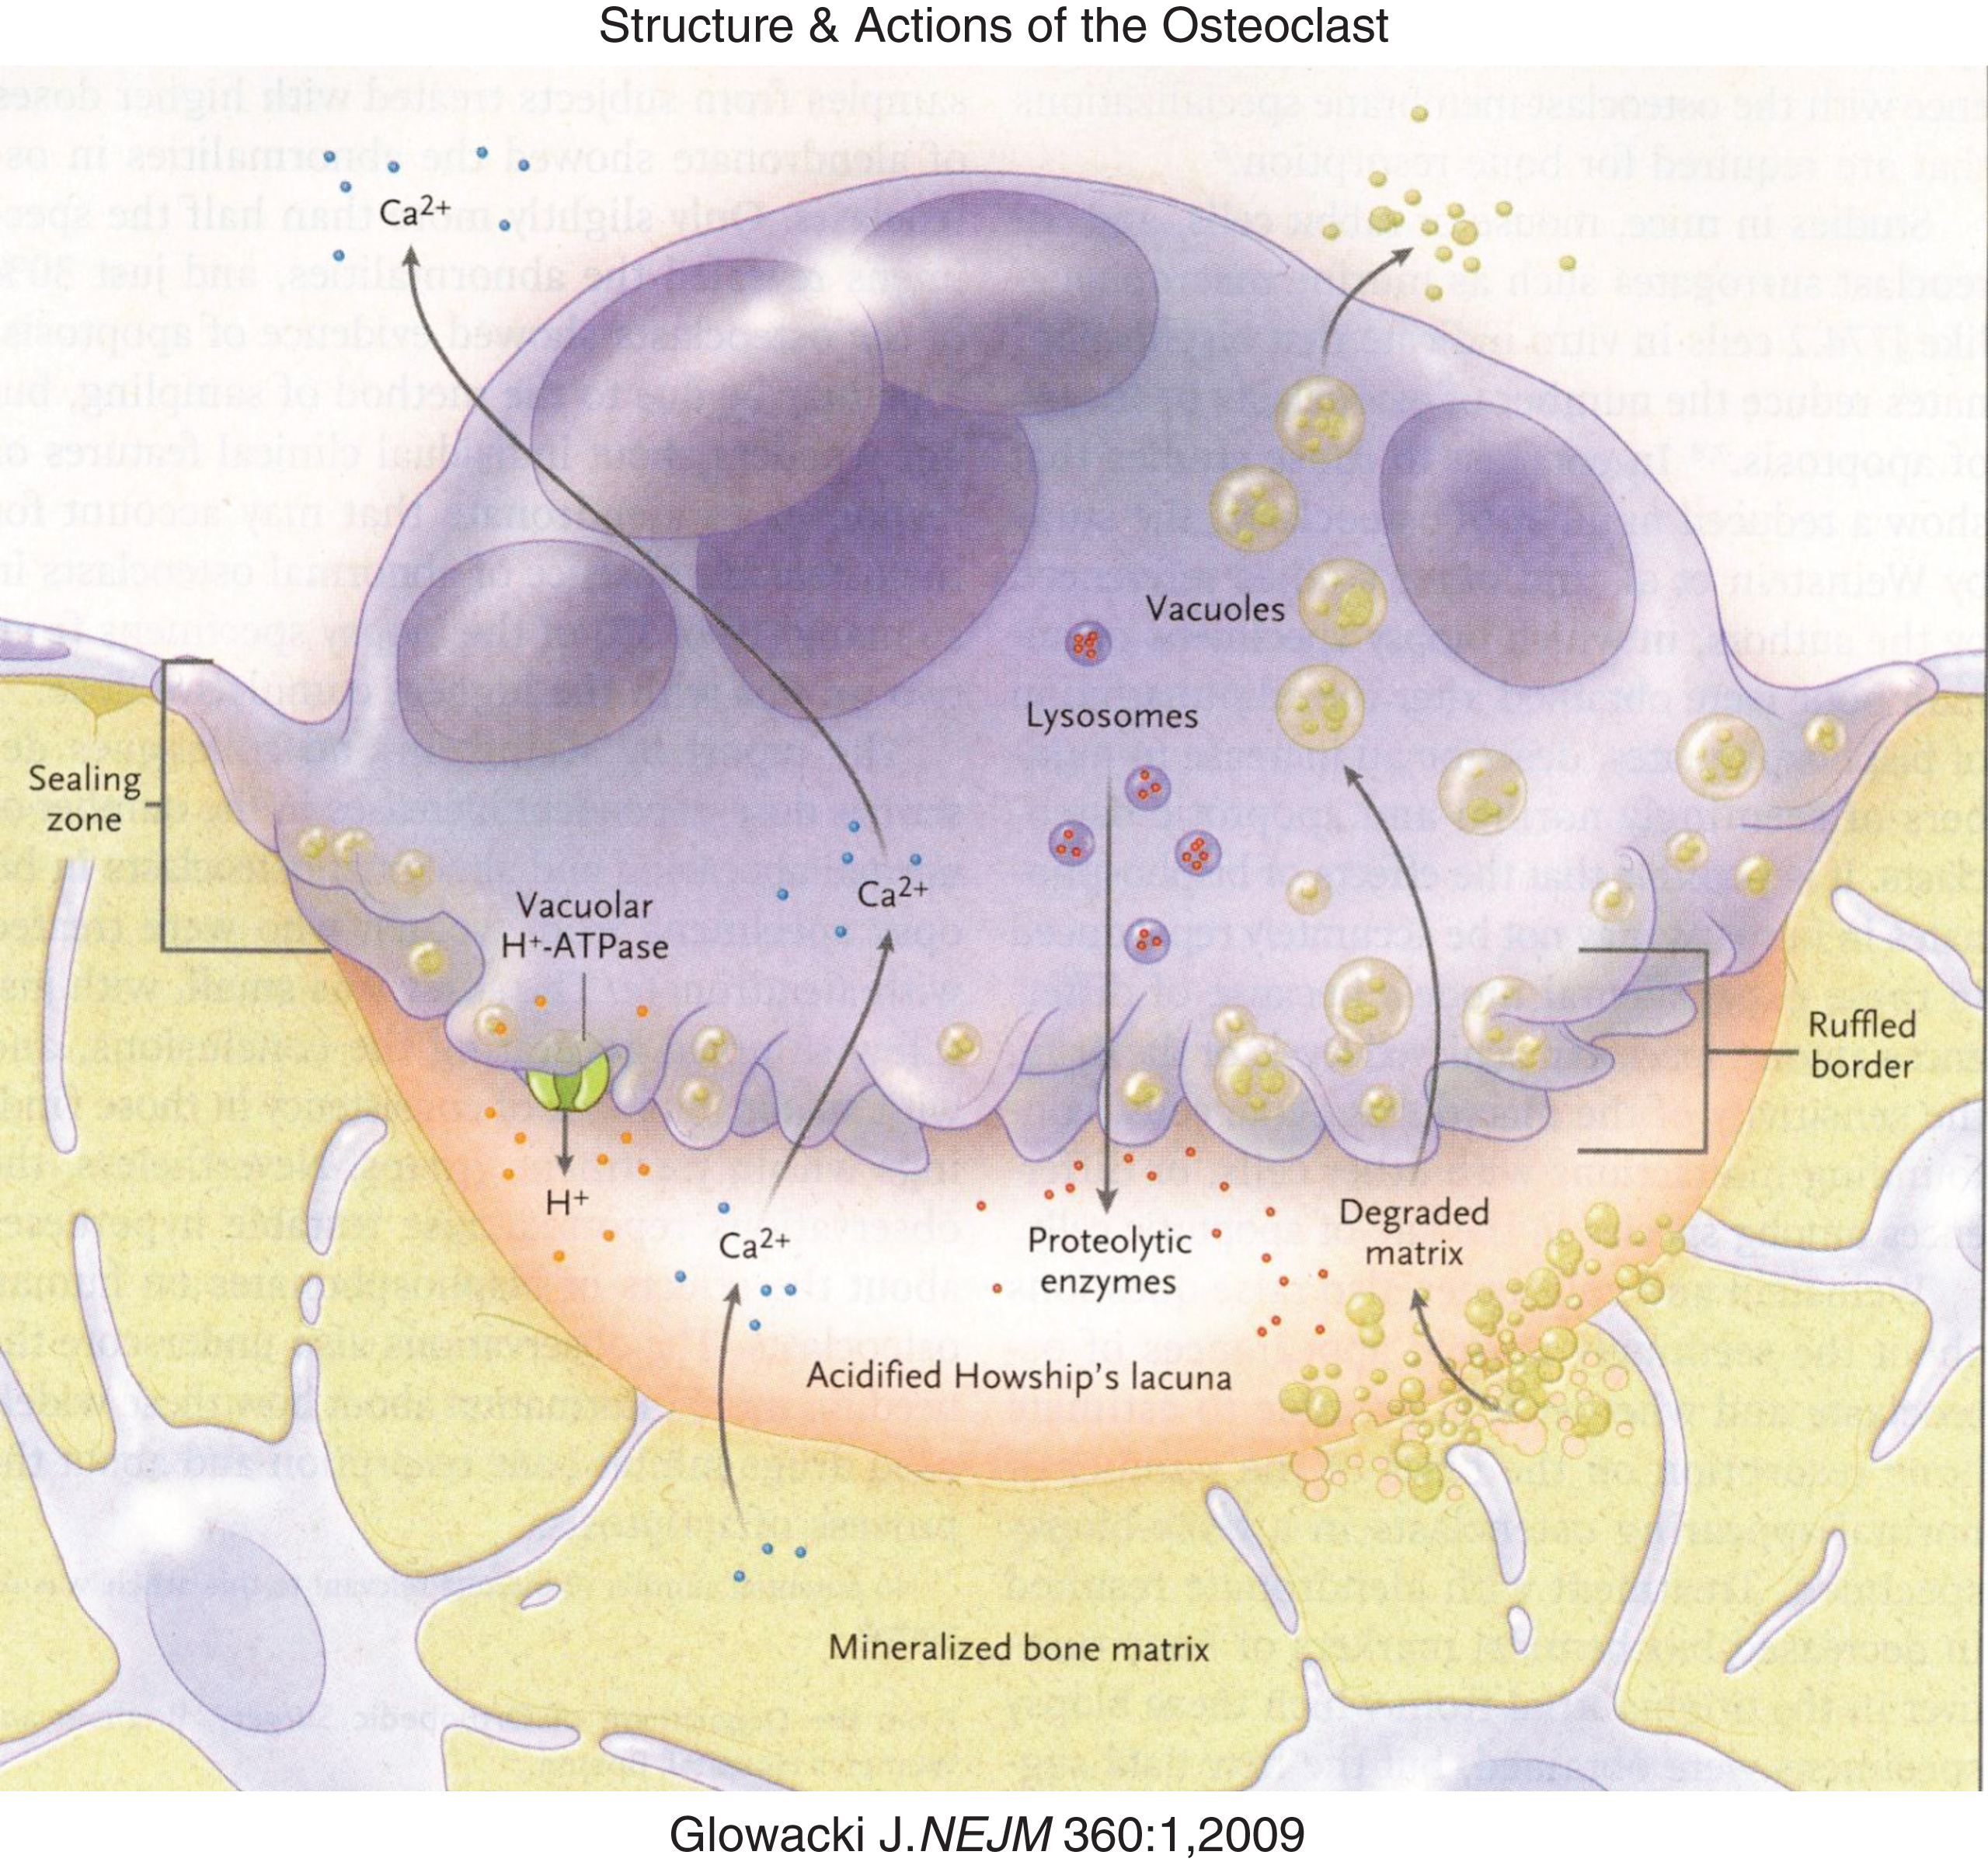 Diagrammatic representation of osteoclastic bone reabsorption depicting the osteoclast adherent to bone, subosteoclastic lacuna, secretion of acid and proteolytic enzymes into the lacuna and transport of digested products of reabsorption through the osteoclast. (Reproduced with permission from Glowacki J The deceiving appearances of osteoclasts. N Engl J. Med 360:80-82,2009.)